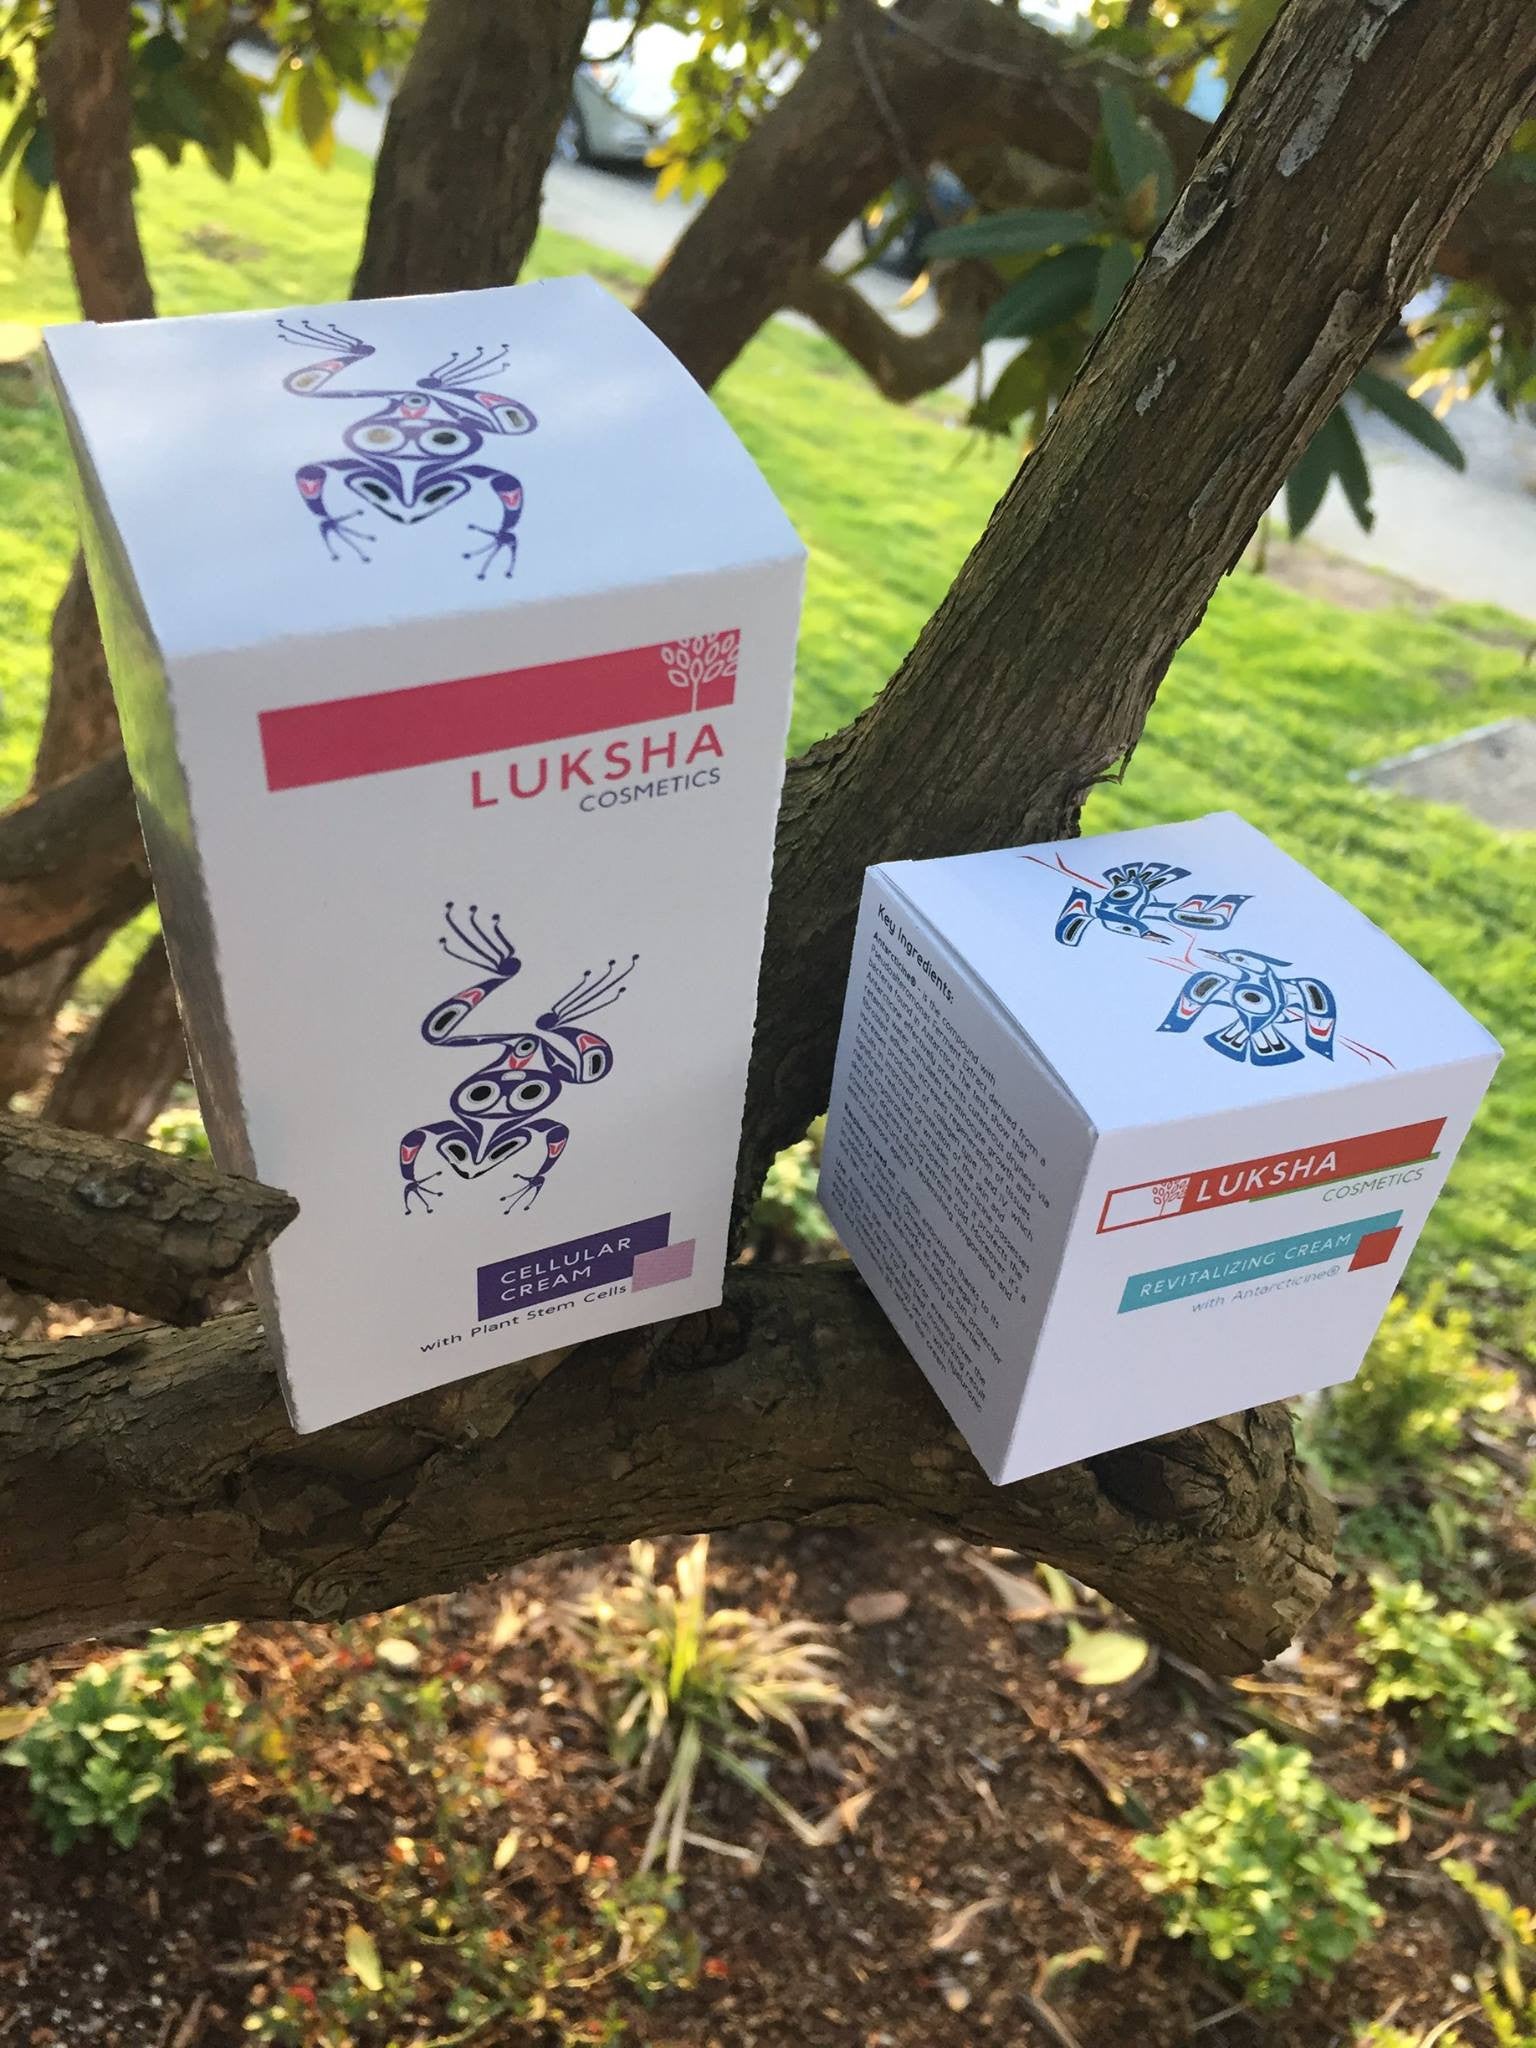 Luksha products are even more exciting now!